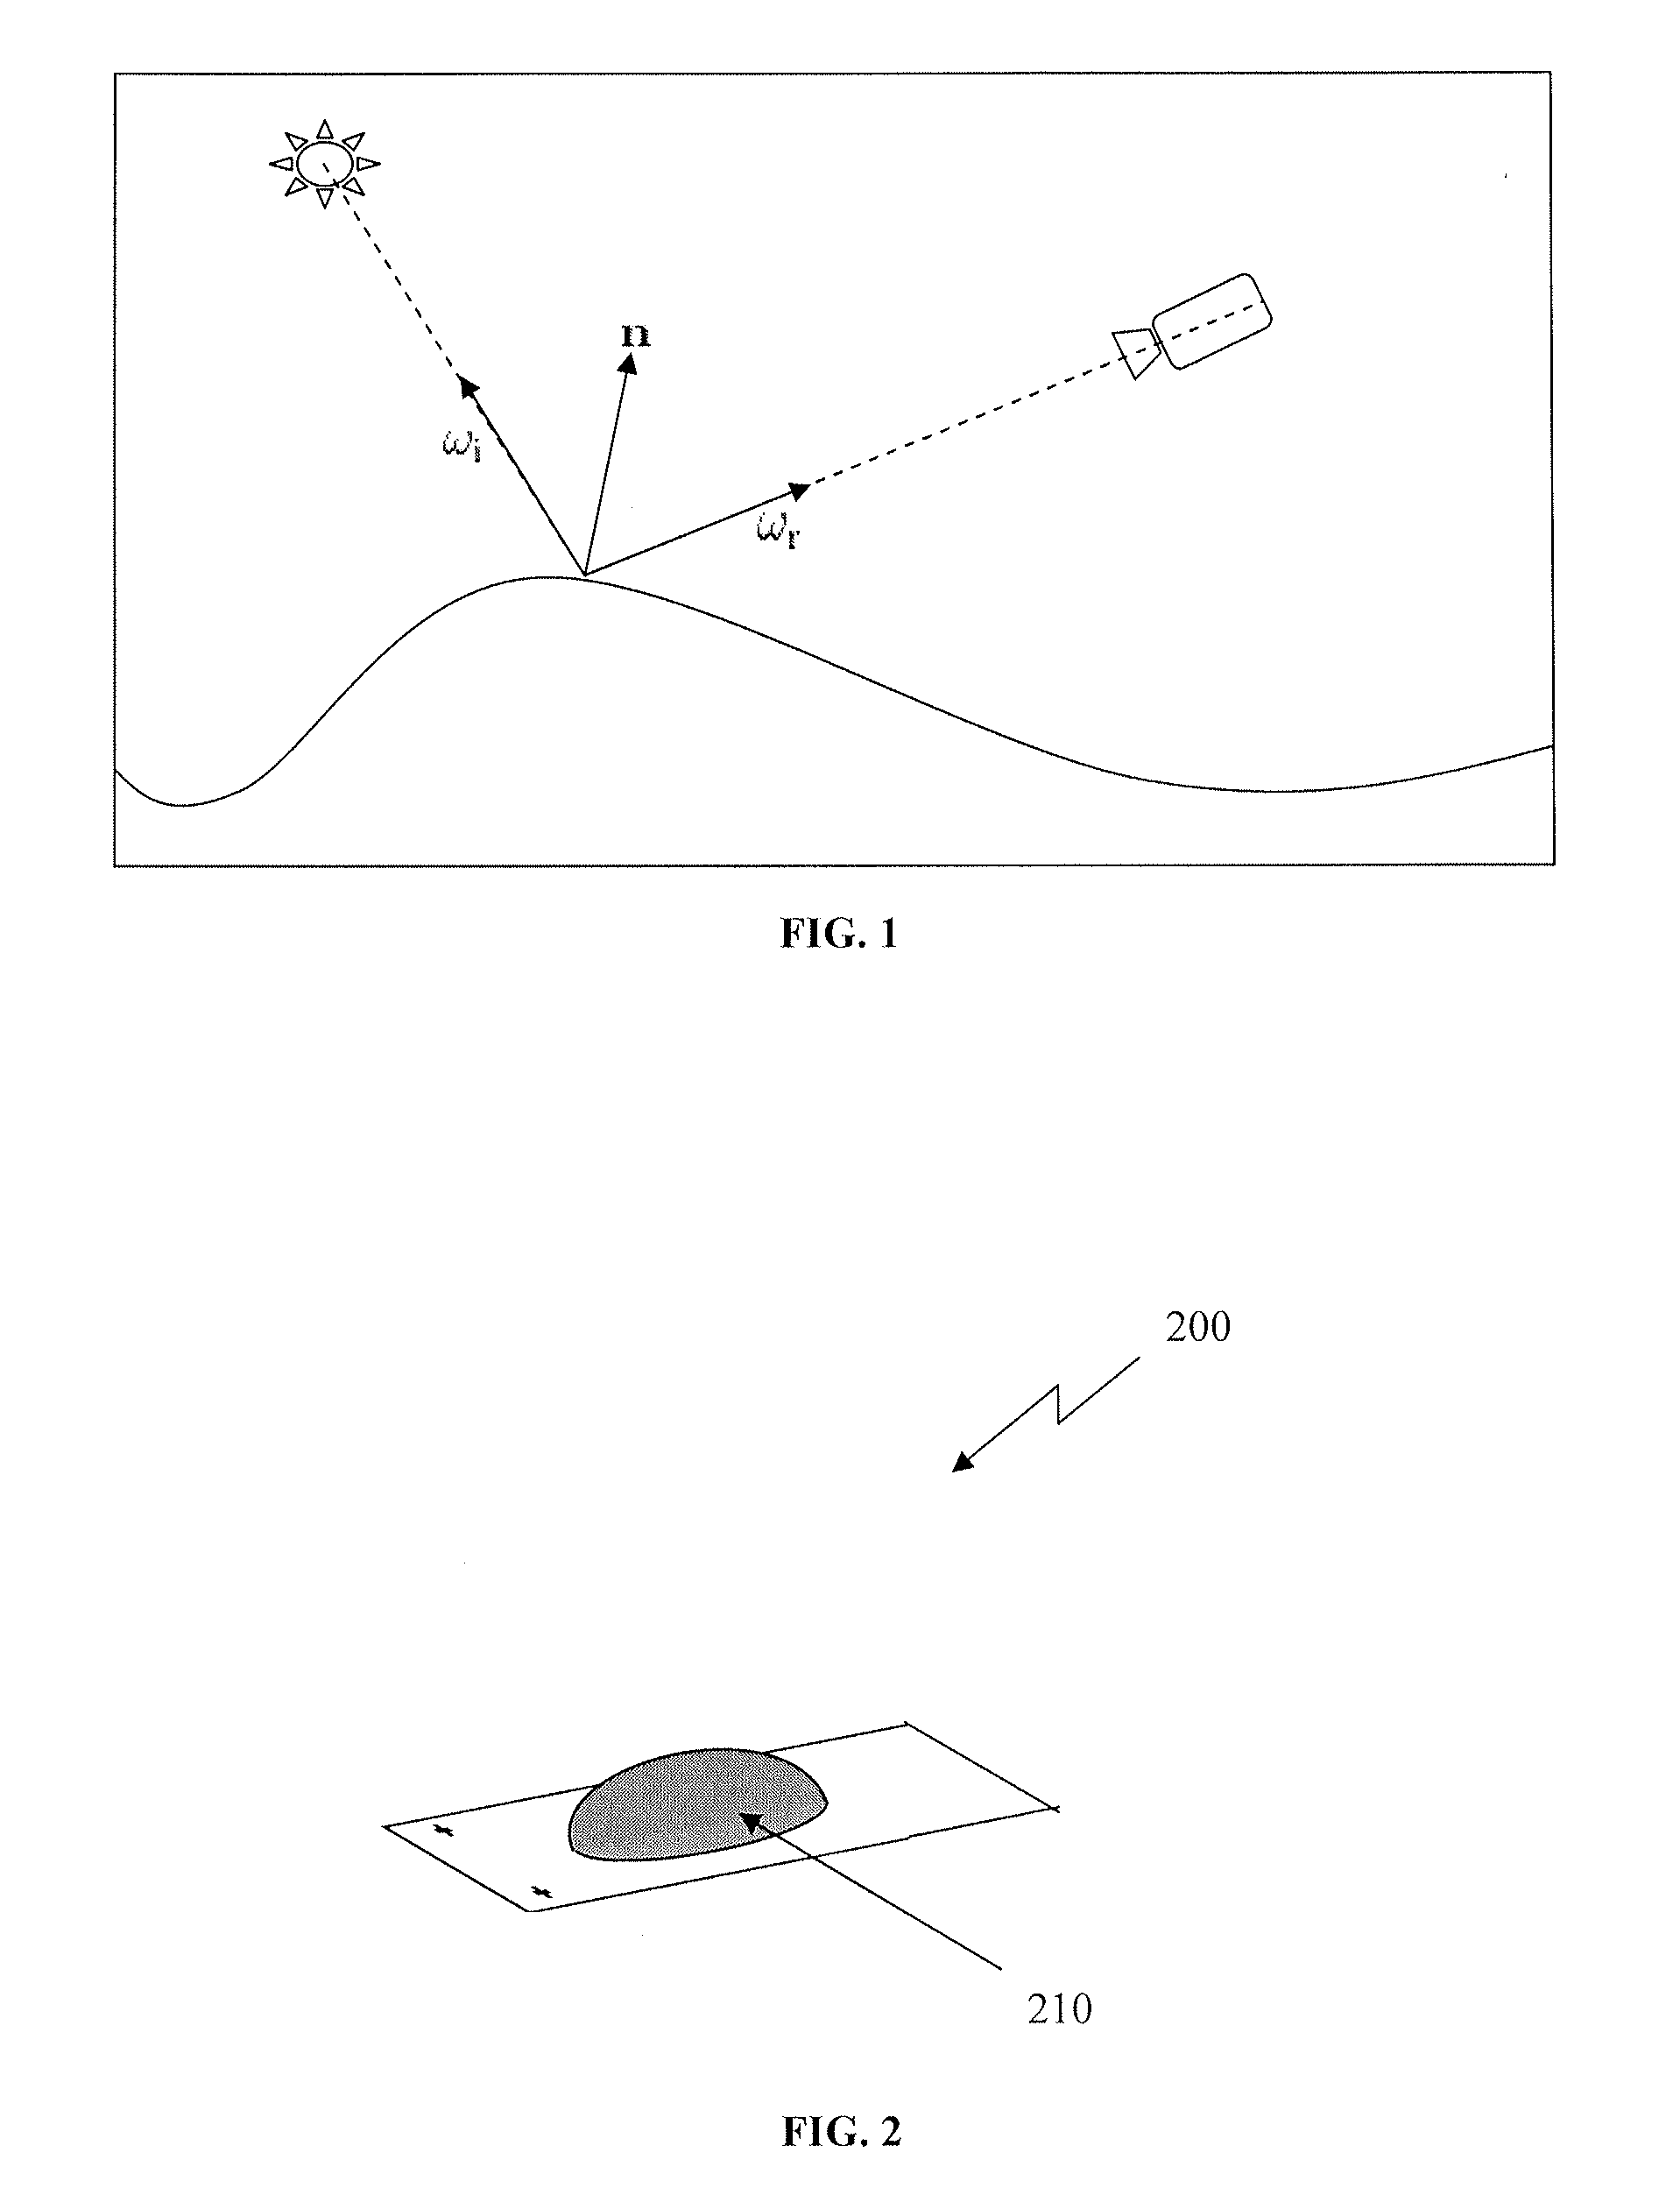 Imaging Apparatus, Systems and Methods